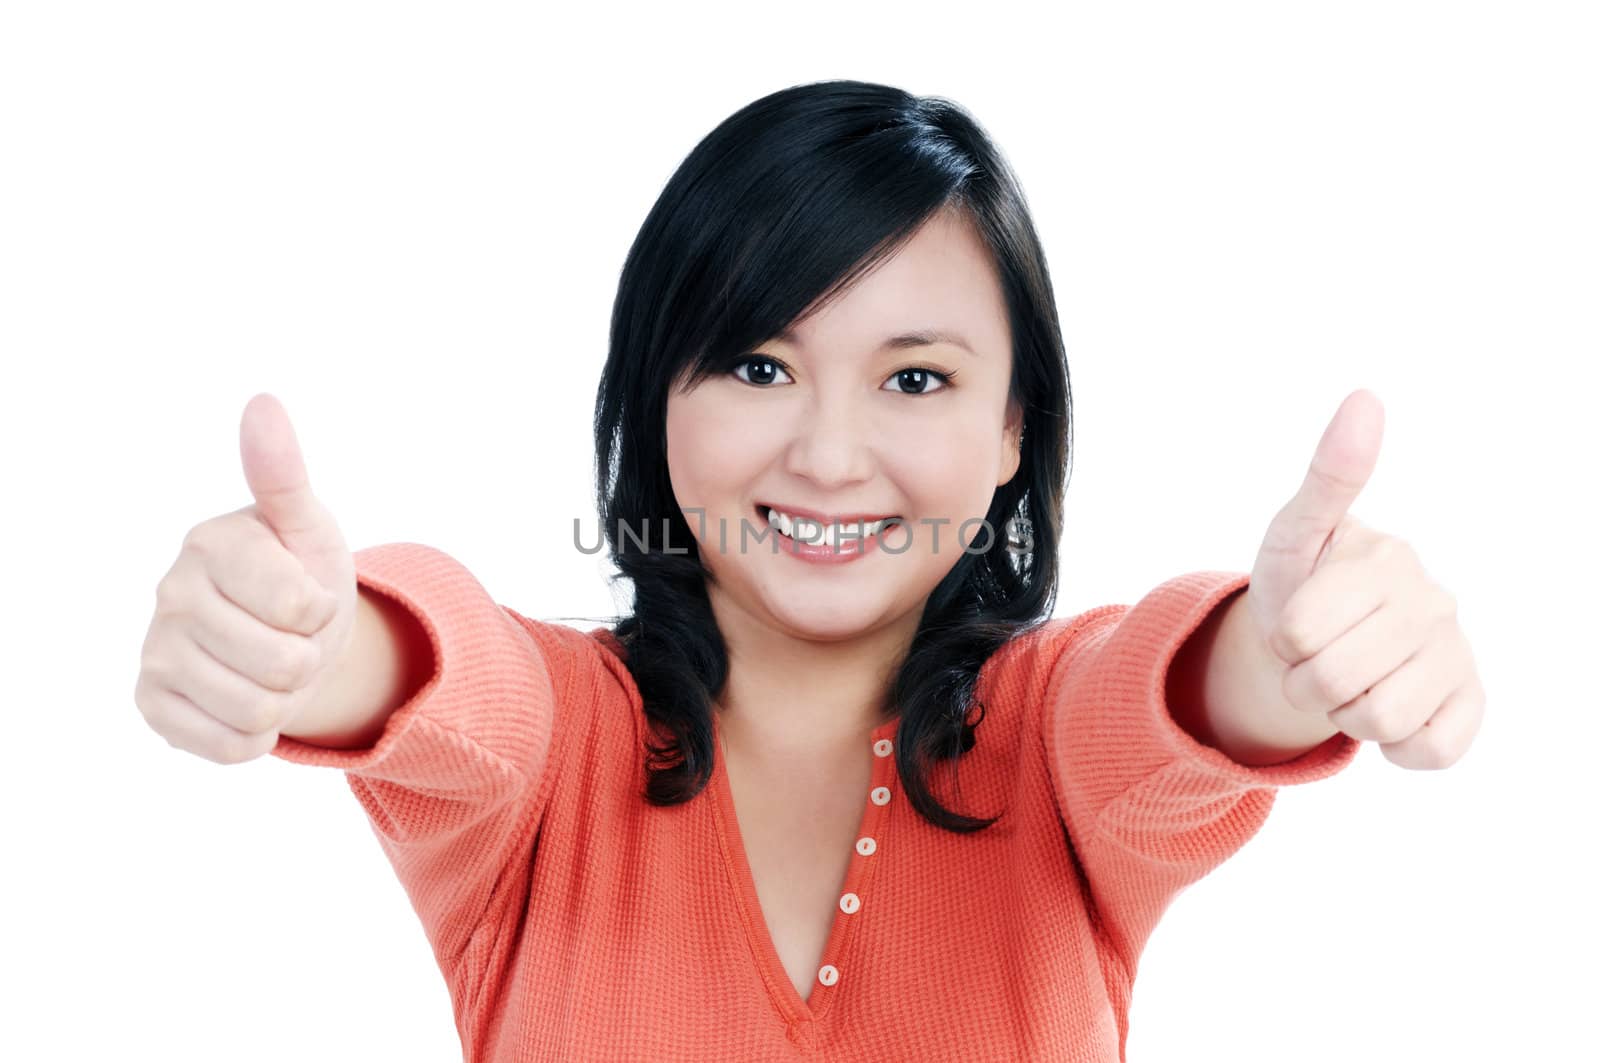 Portrait of a beautiful woman giving thumbs up sign over white background.